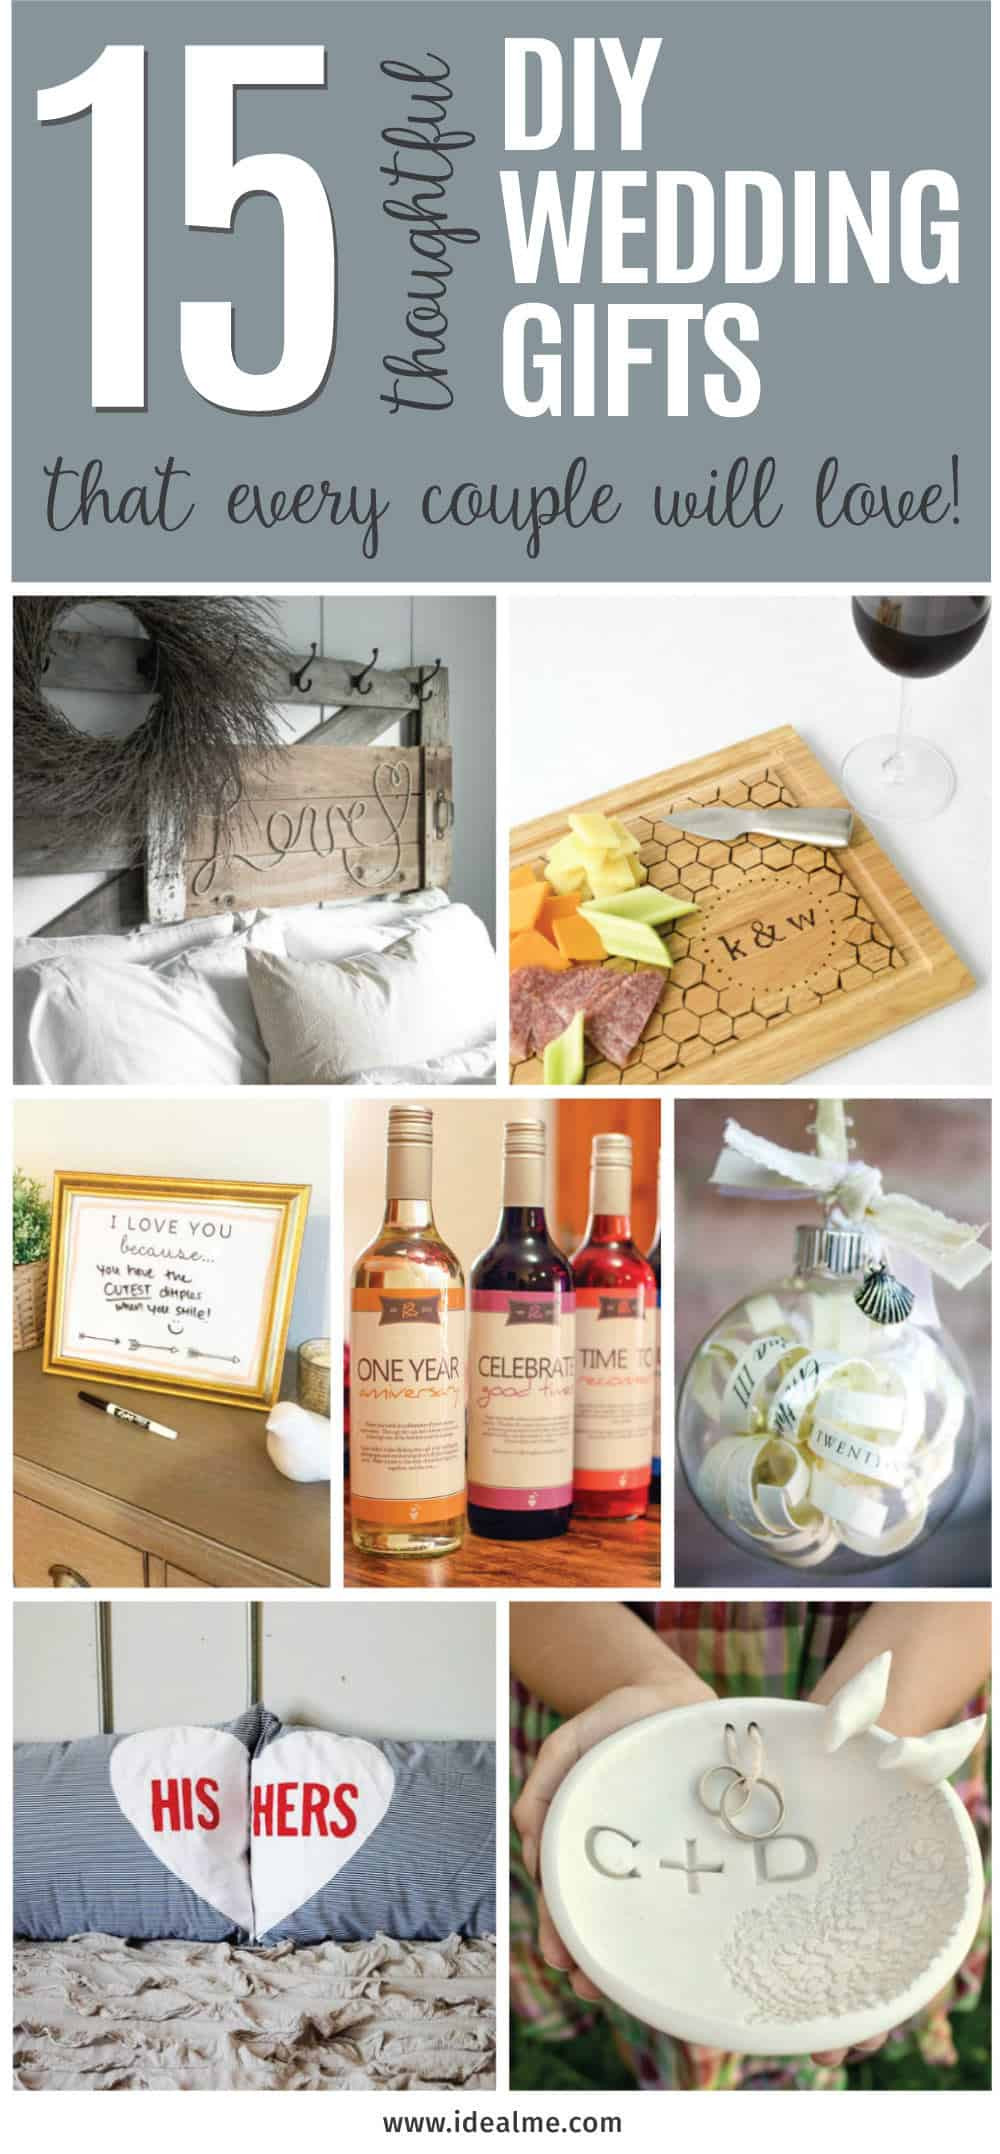 Wedding Gift DIY
 15 Thoughtful DIY Wedding Gifts that Every Couple Will